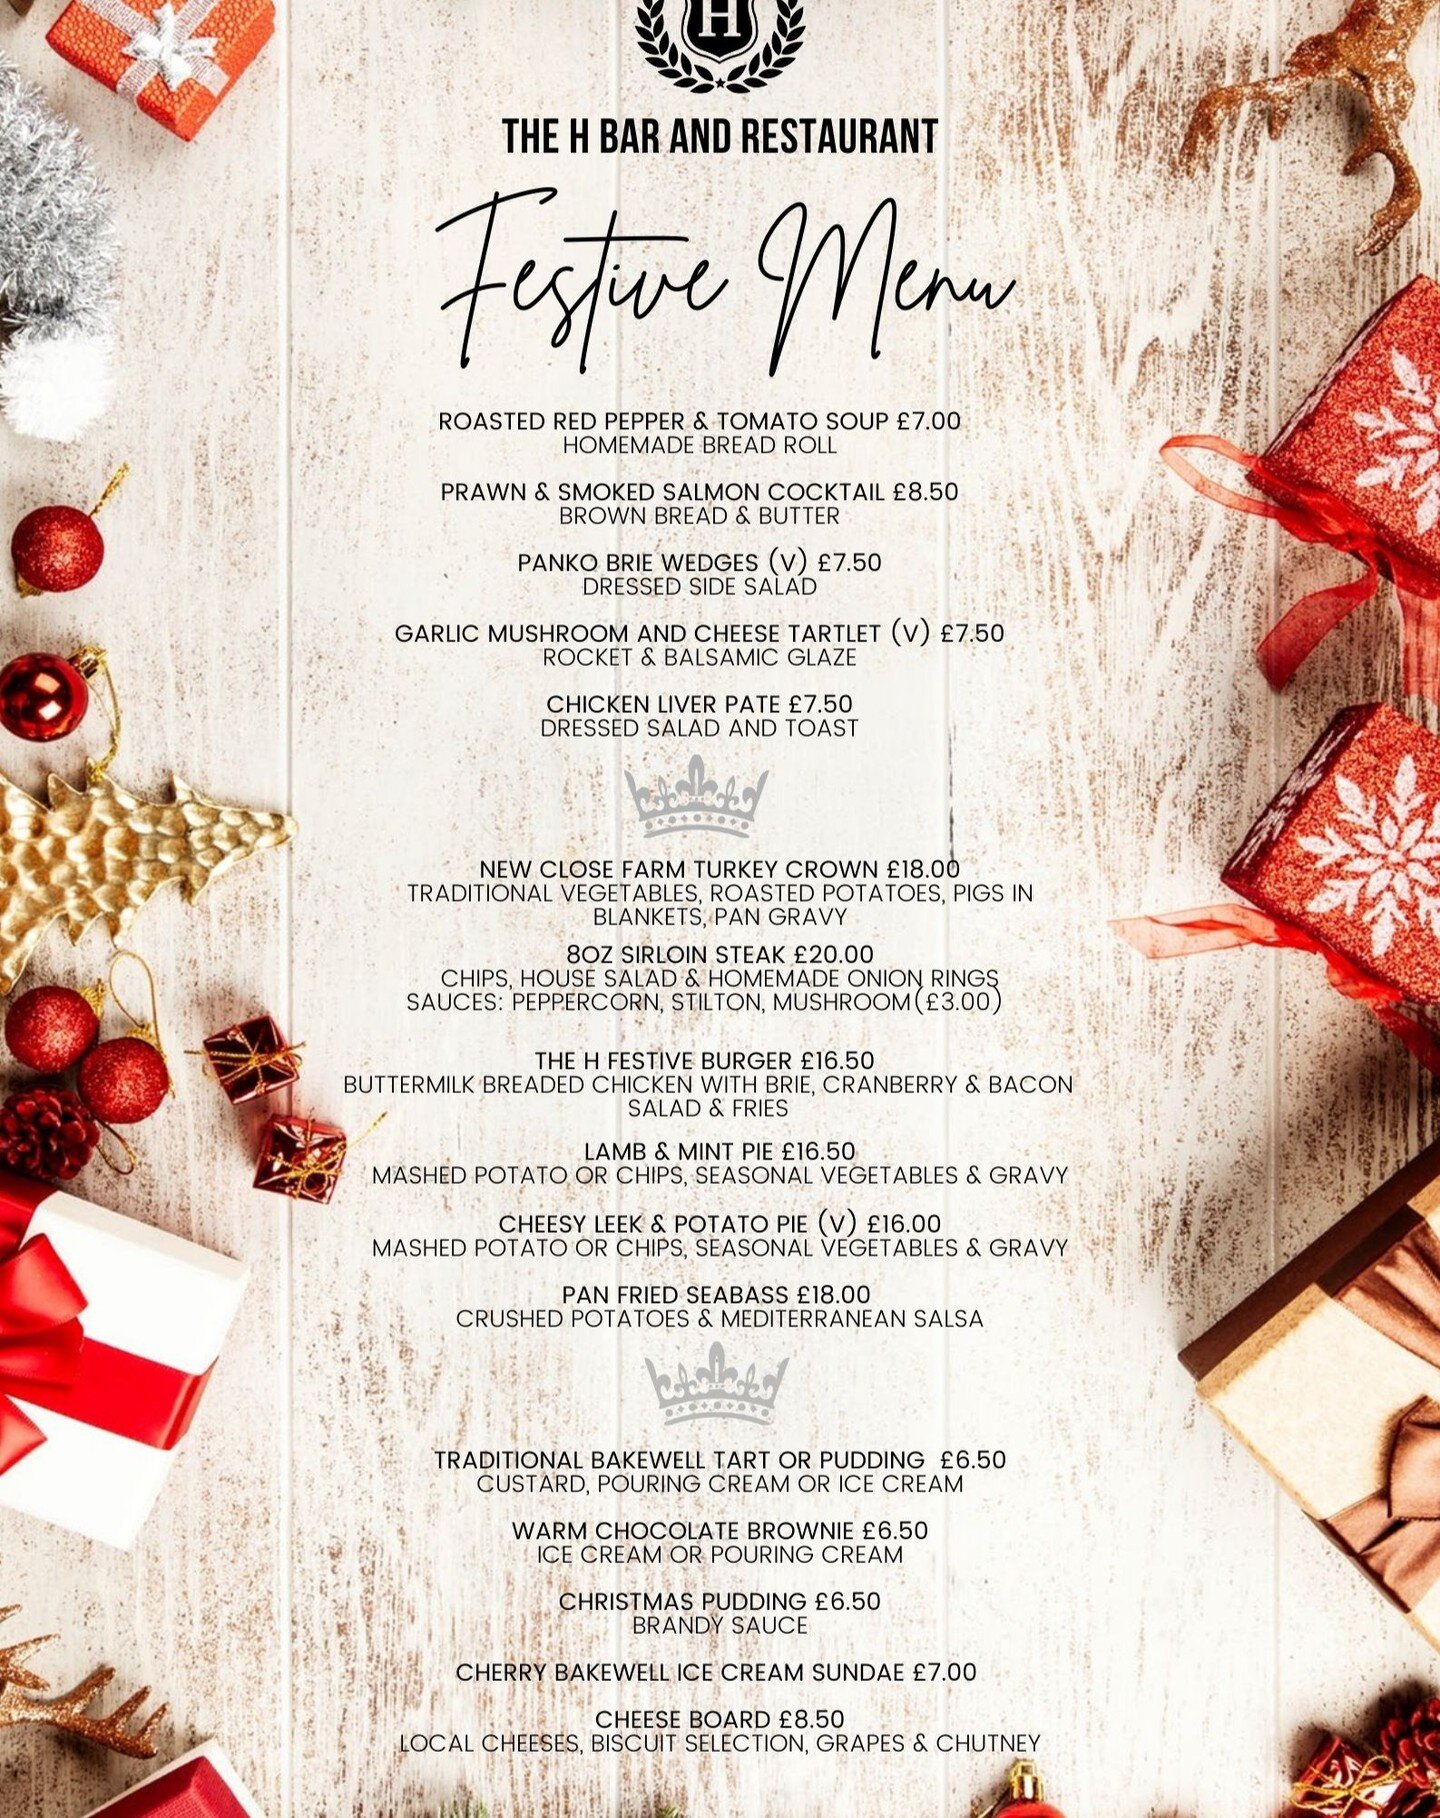 Come and join The H Bar and Restaurant, Bakewell this Christmas! ❄️🎁 ⛄️

Festive Menu available all throughout December.

To book please email: restaurant@thehboutiquehotel.co.uk or alternatively call: 01629 812033

 #derbyshire #Bakewell #hotelstay